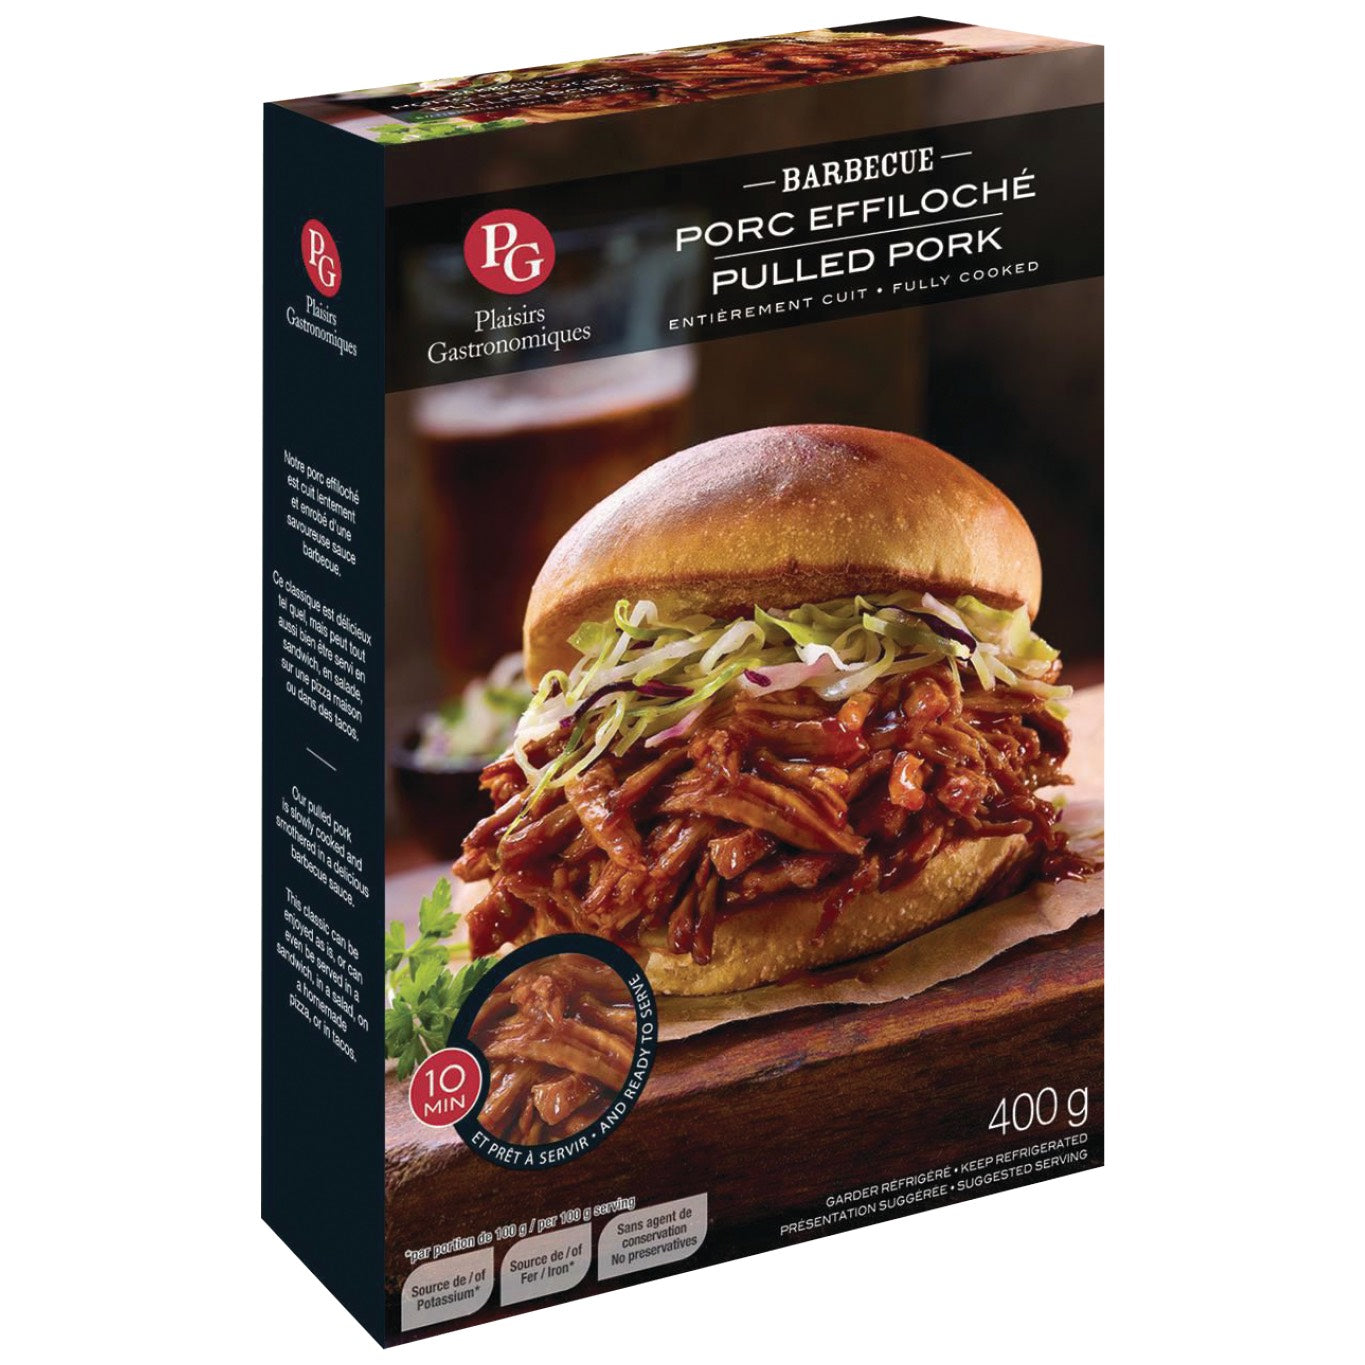 Barbecue pulled pork